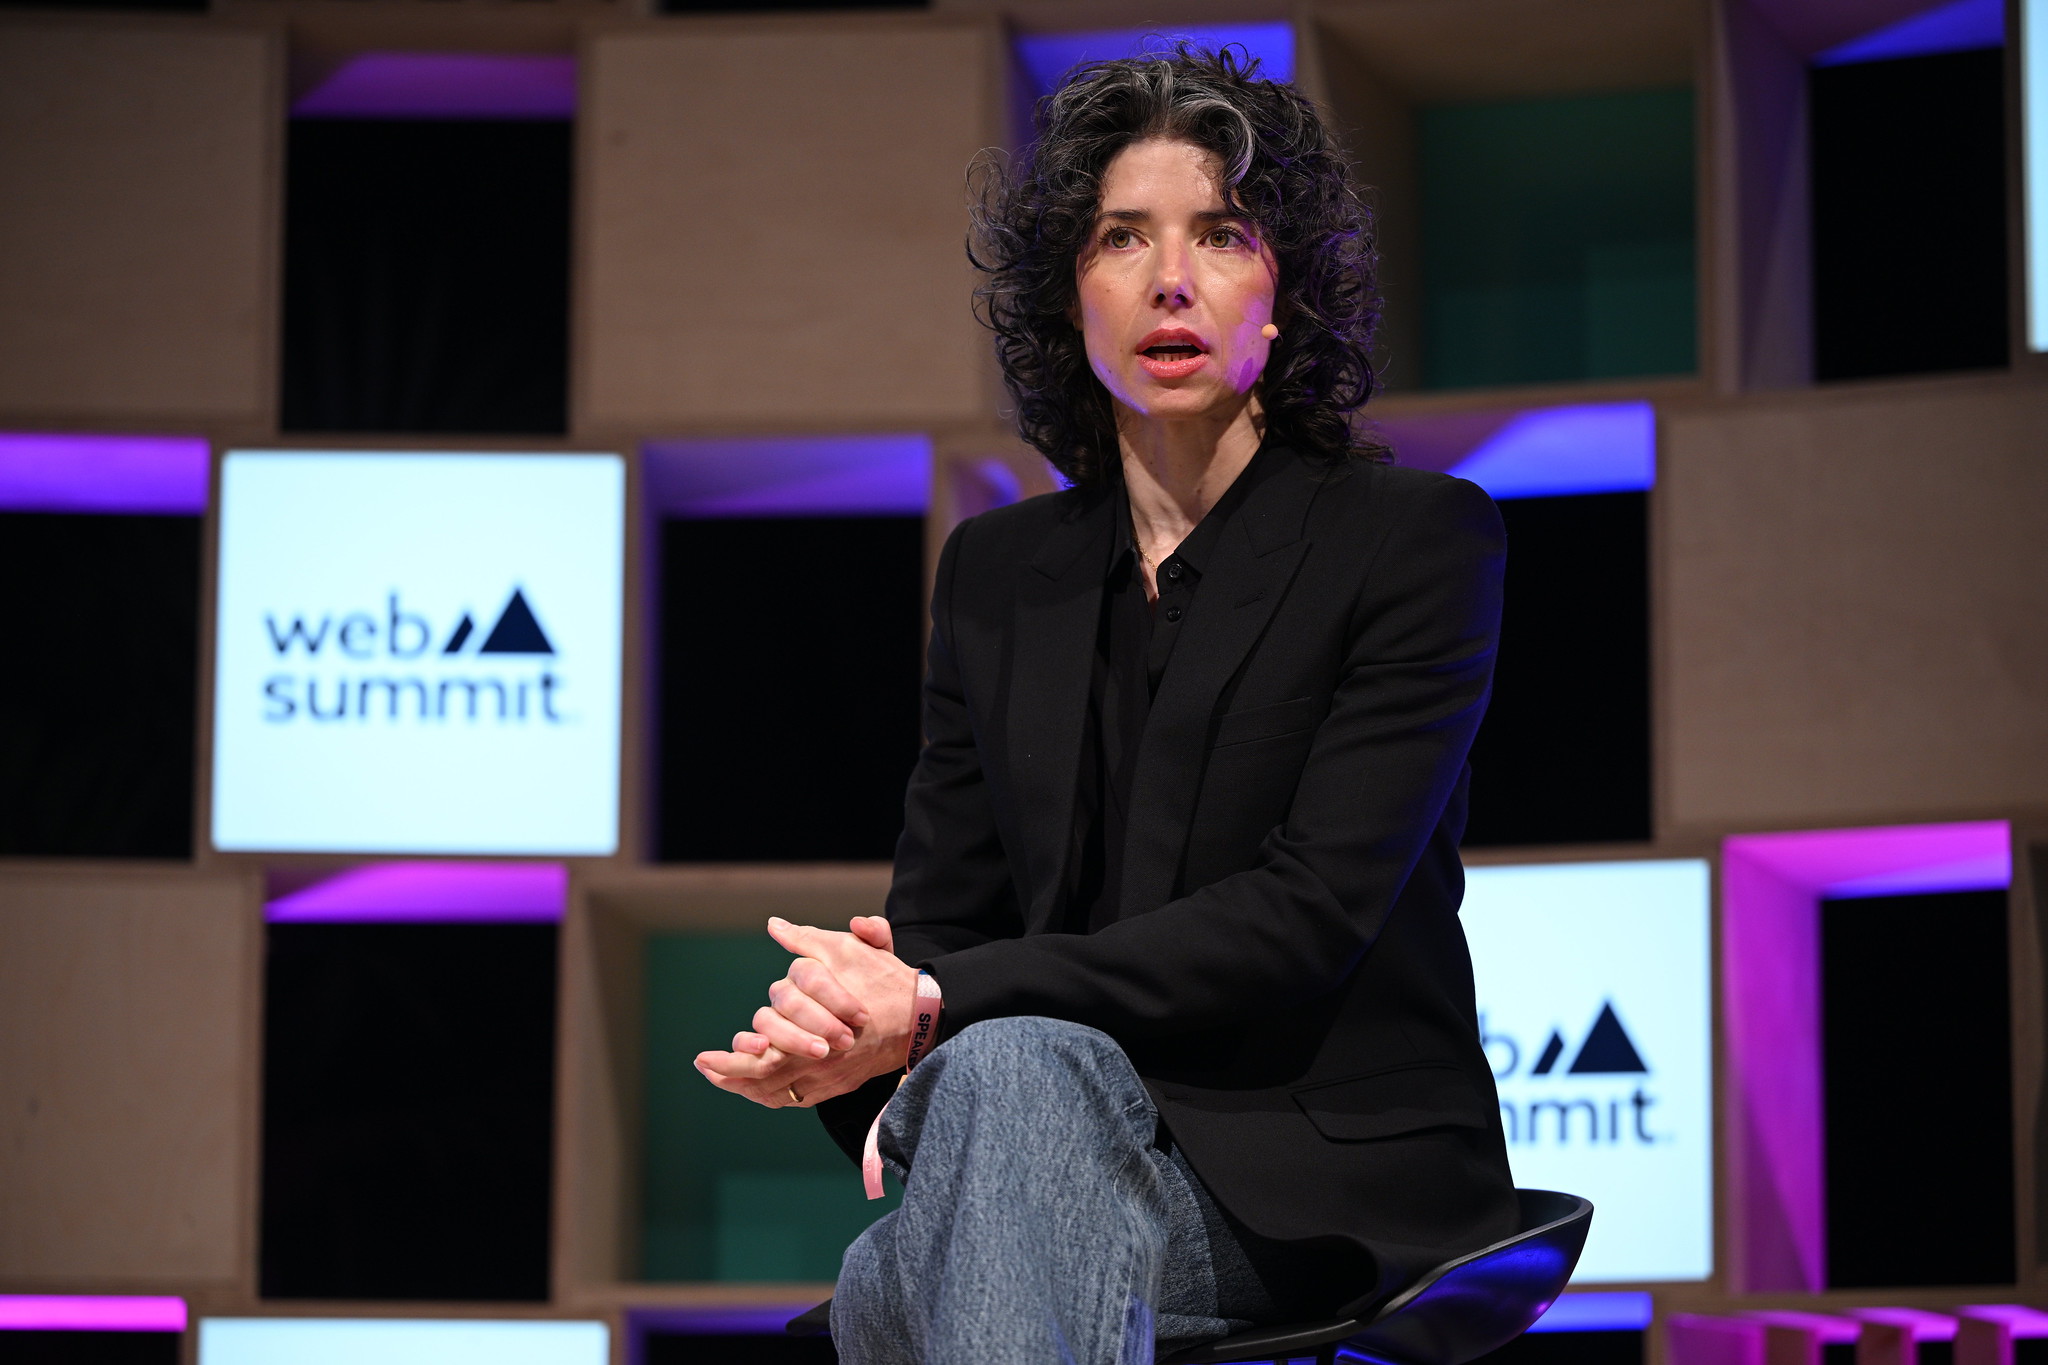 Photograph of a person (Meredith Whittaker, president of Signal) speaking on stage at Web Summit. The person is sitting on a chair. They are wearing a headset and appear to be speaking.